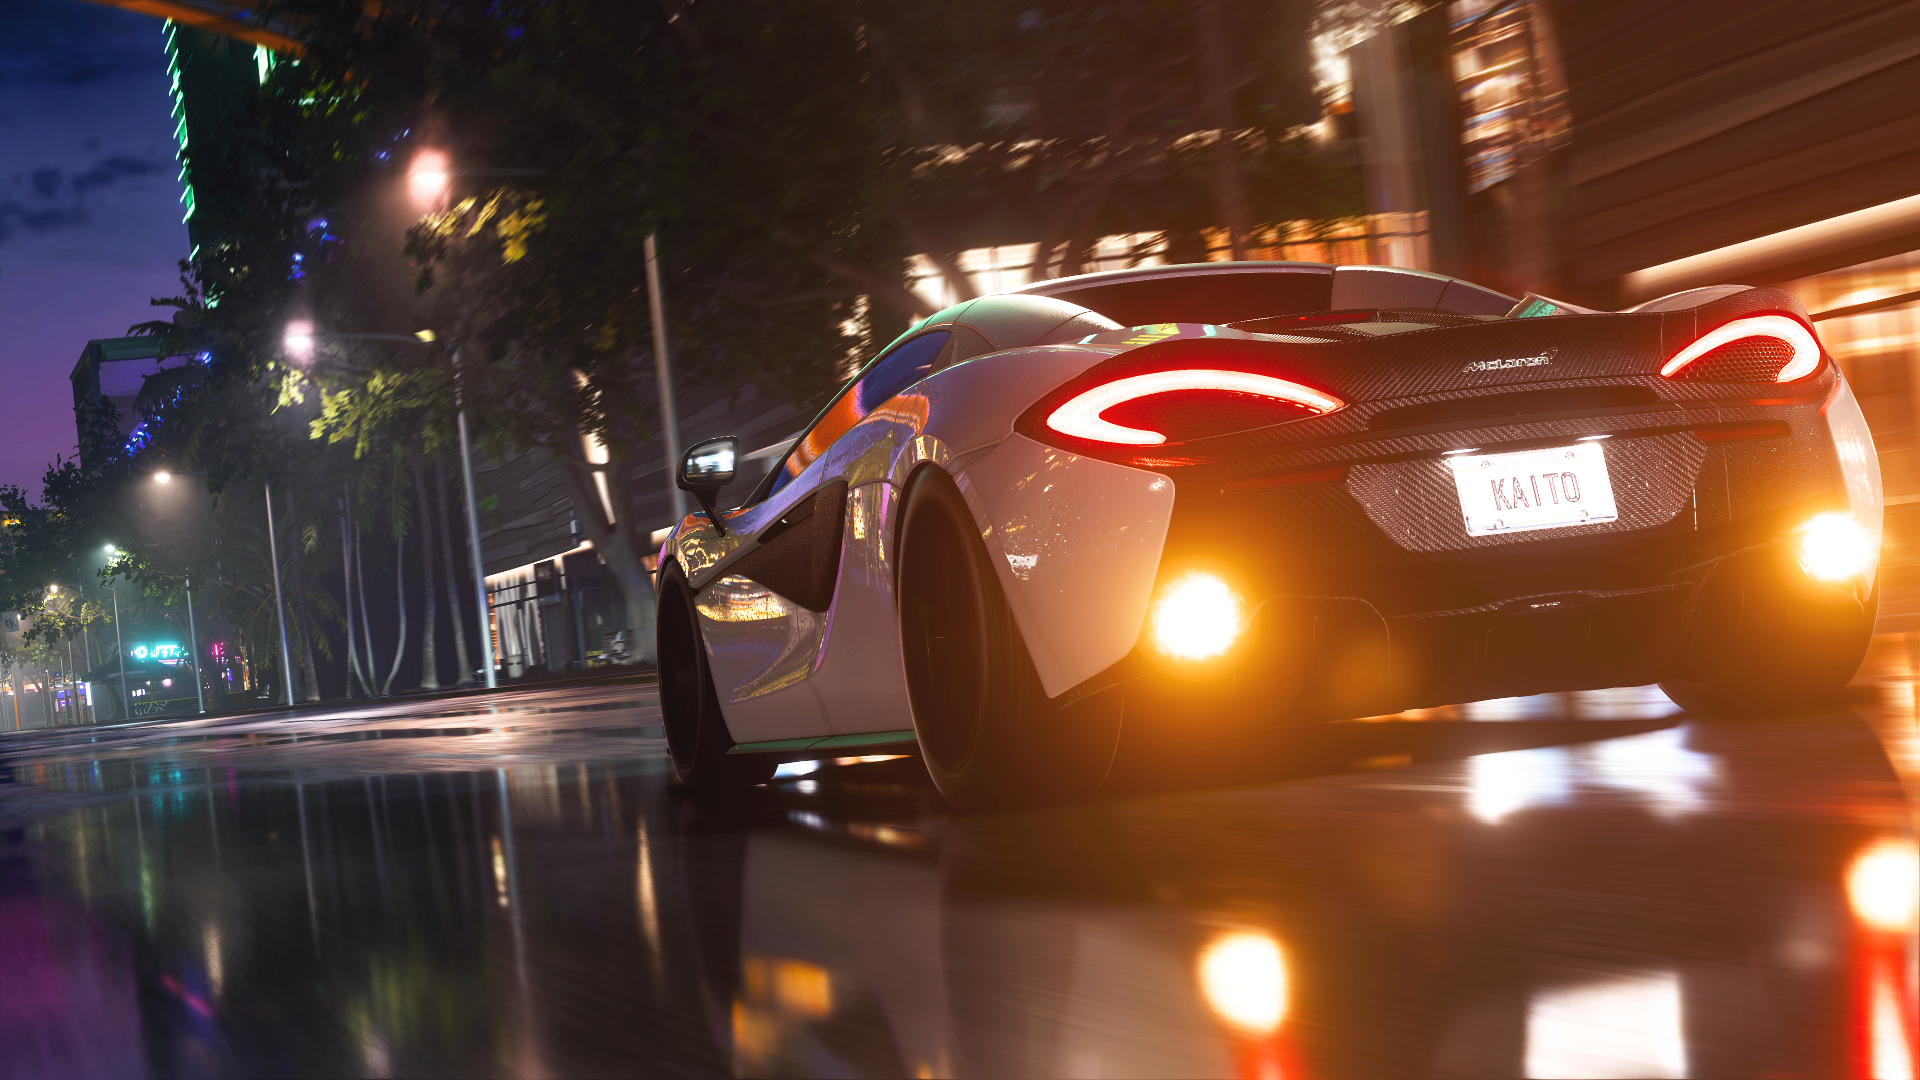 Need For Speed Heat Need For Speed EA Games Car Video Game Car Race Cars 4K Gaming 4k Pic Neon Custo 1920x1080